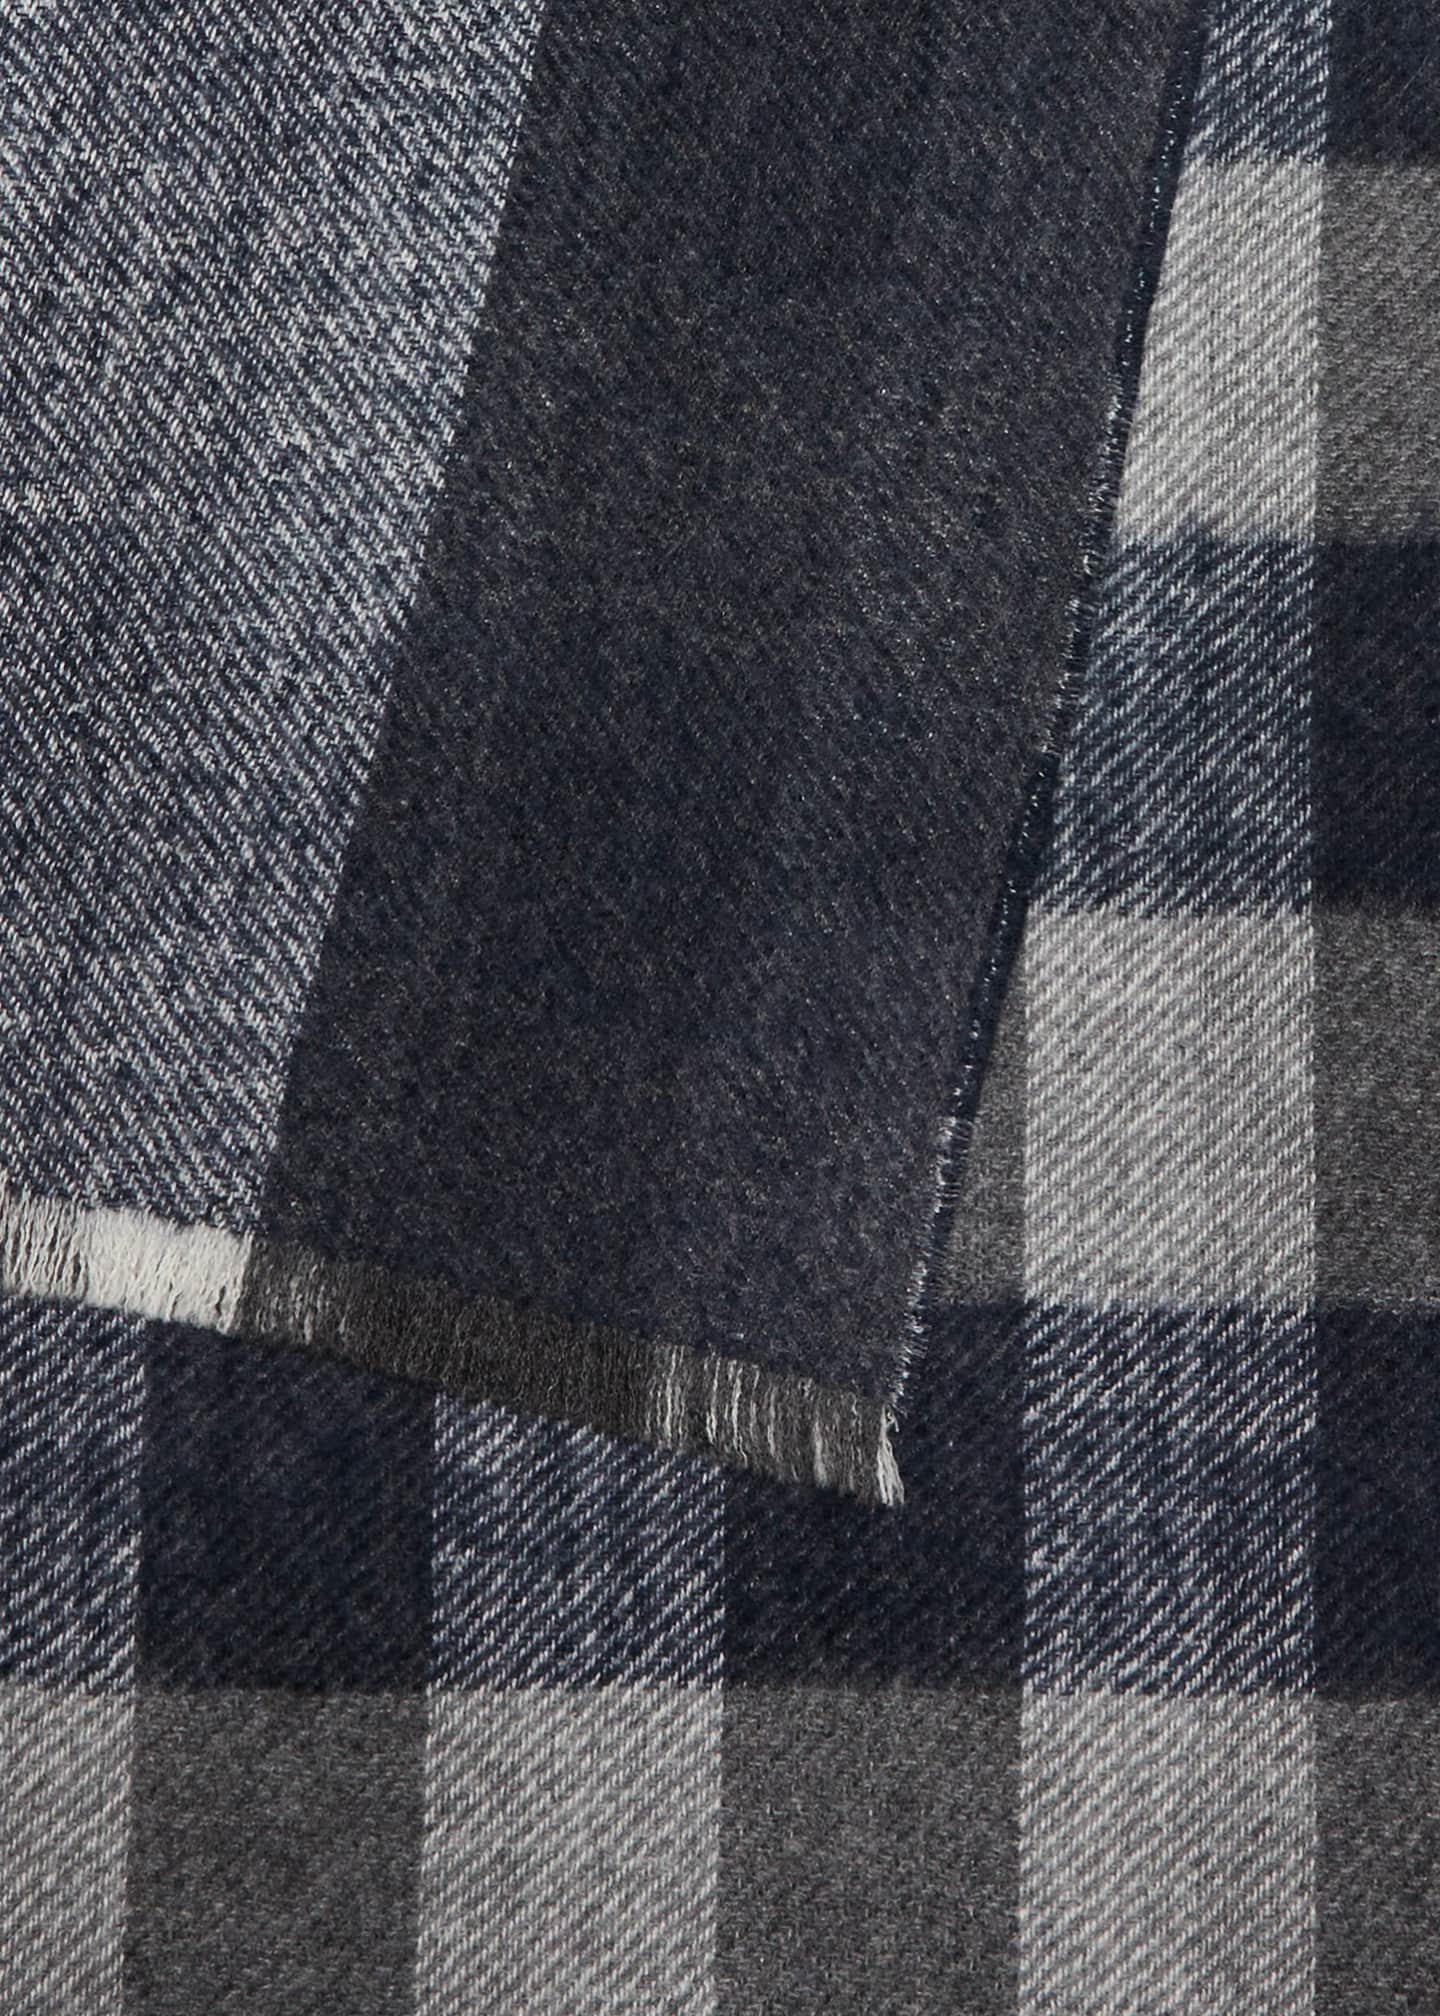 Alonpi Men's Cashmere Doubled-Faced Check Scarf